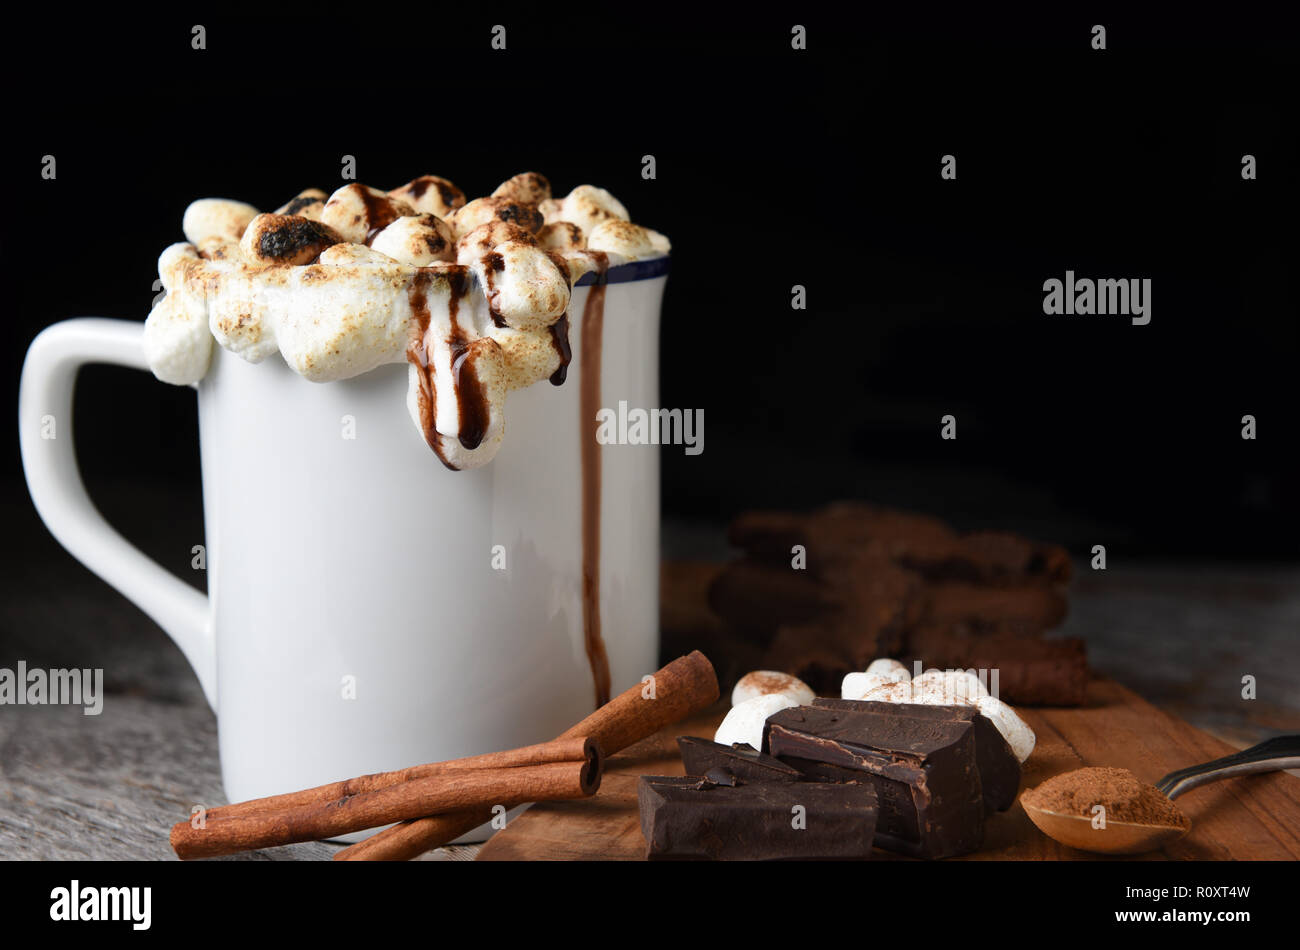 Closeup of a mug of hot cocoa with toasted marshmallows with cookies, chocolate chunks, cinnamon sticks, against a dark background. Stock Photo